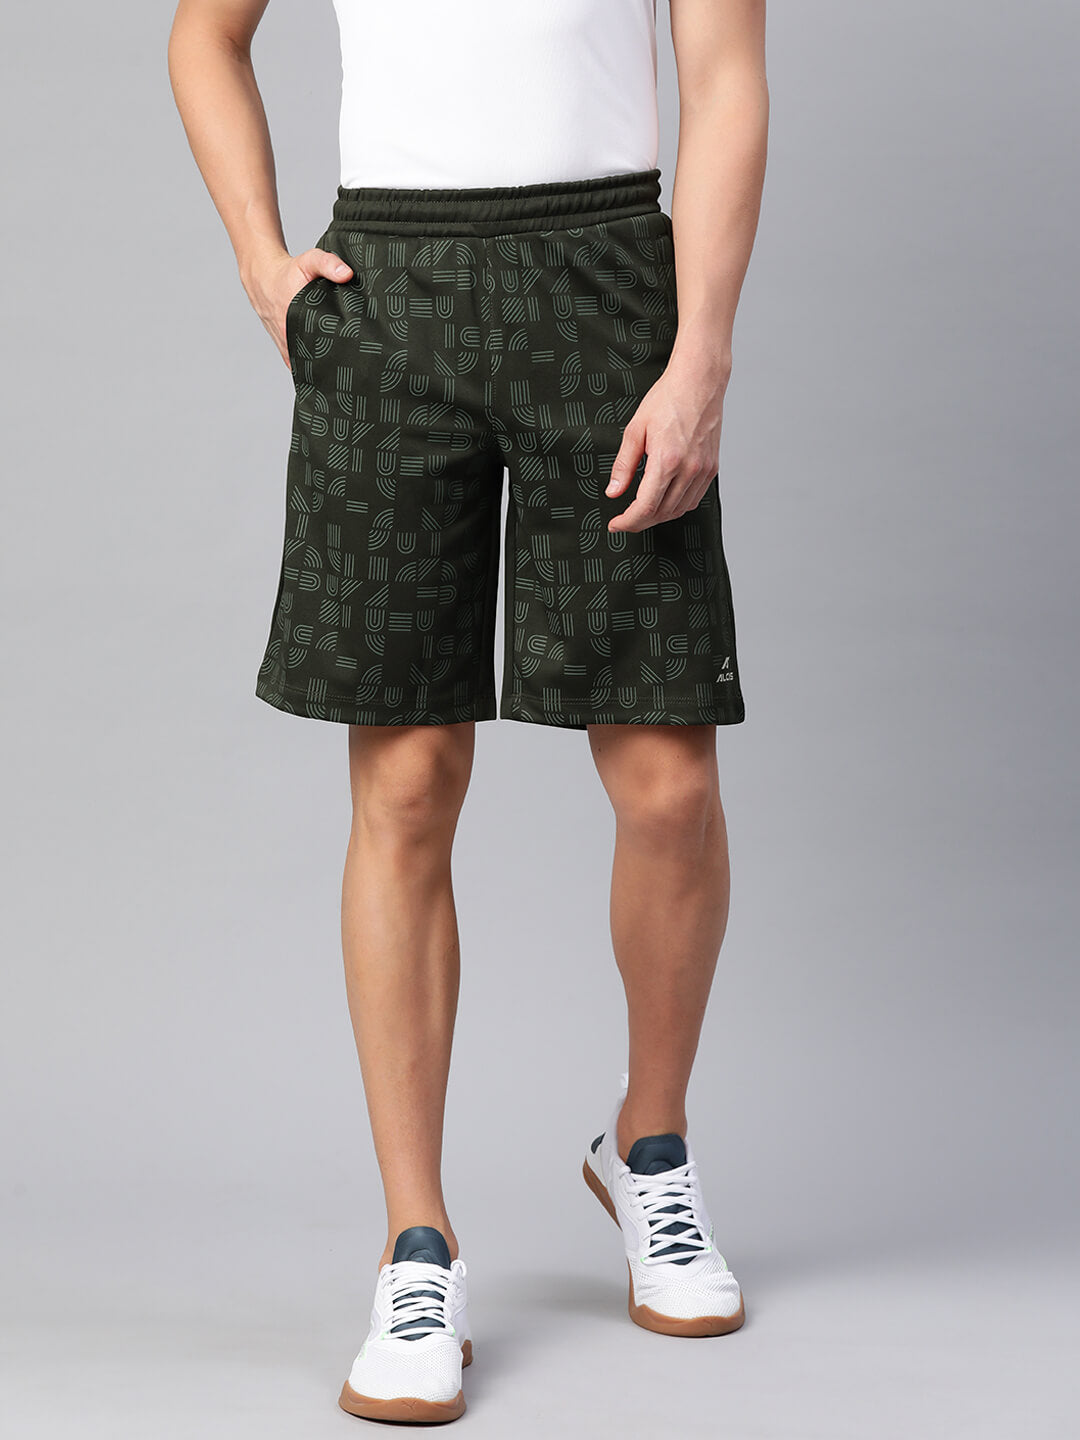 Alcis Men Olive Green Printed Slim Fit Training or Gym Sports Shorts